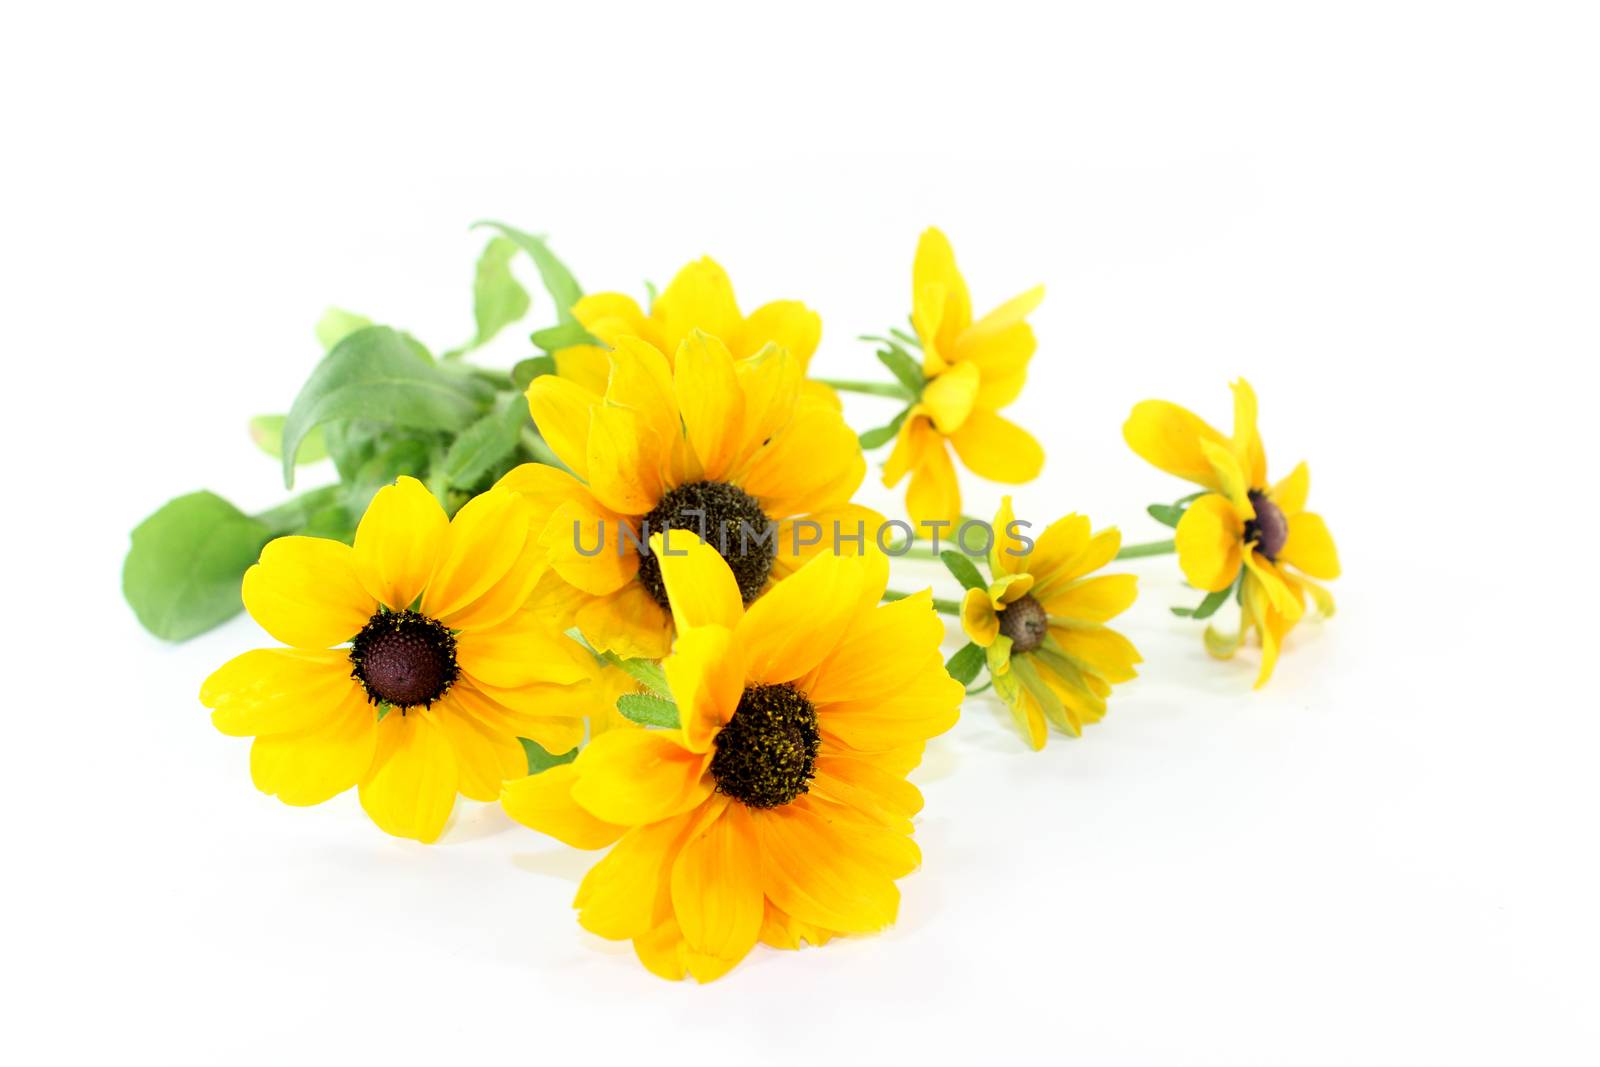 yellow coneflower on a white background